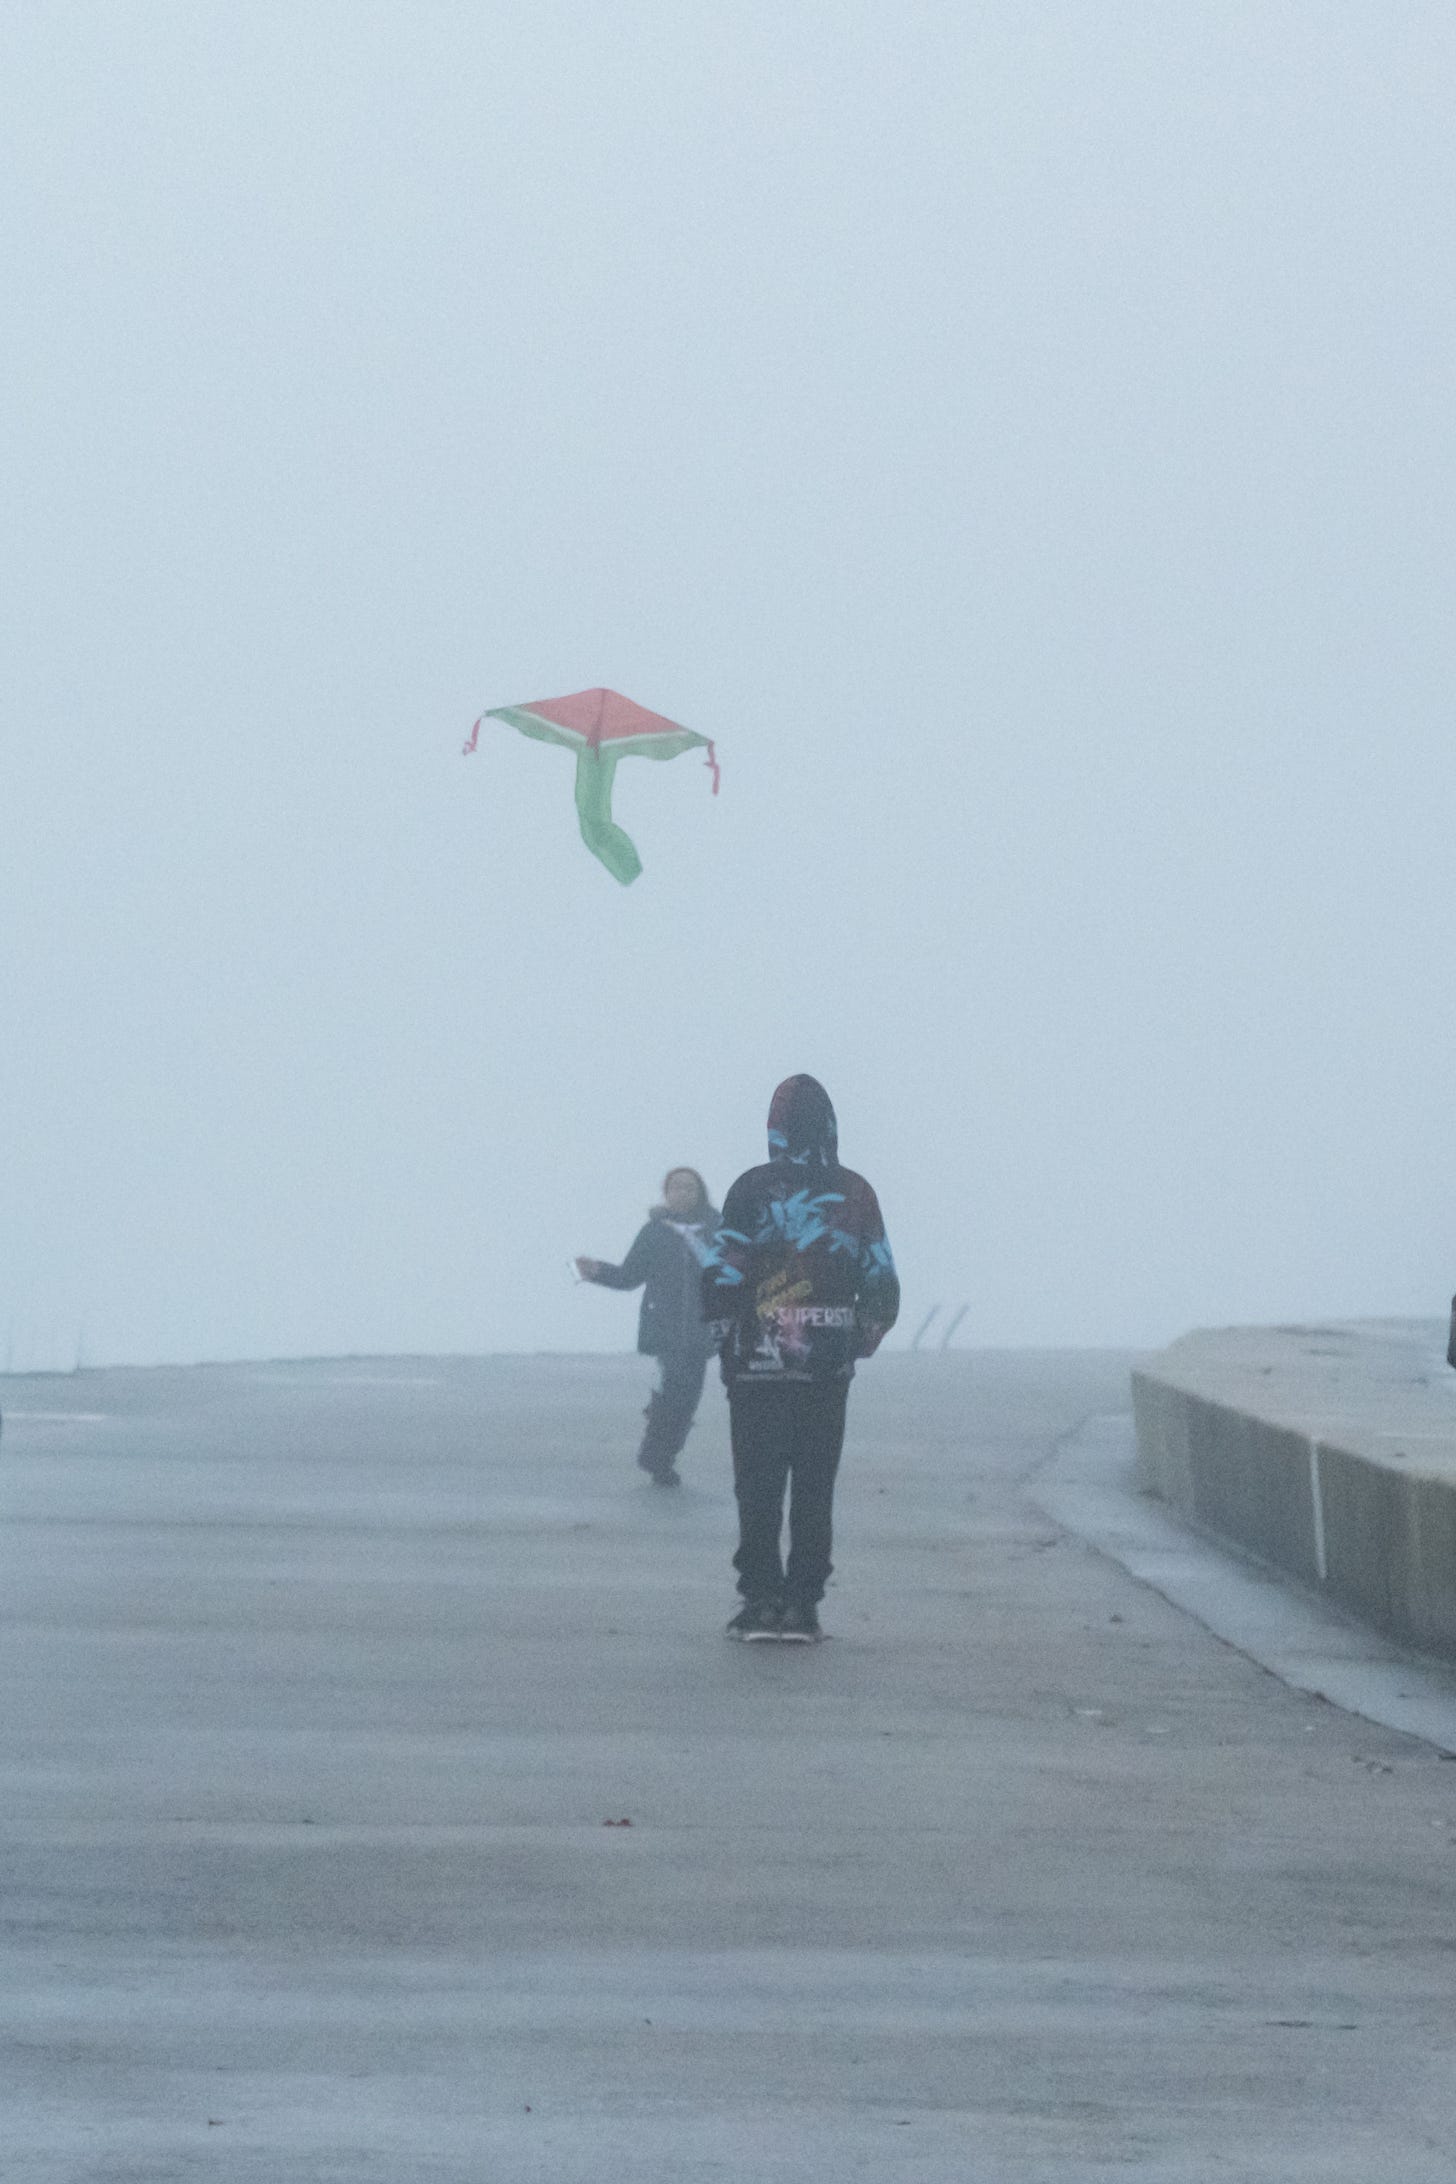 Two children try to fly a kite with the pattern of a watermelon on a foggy day with little wind.